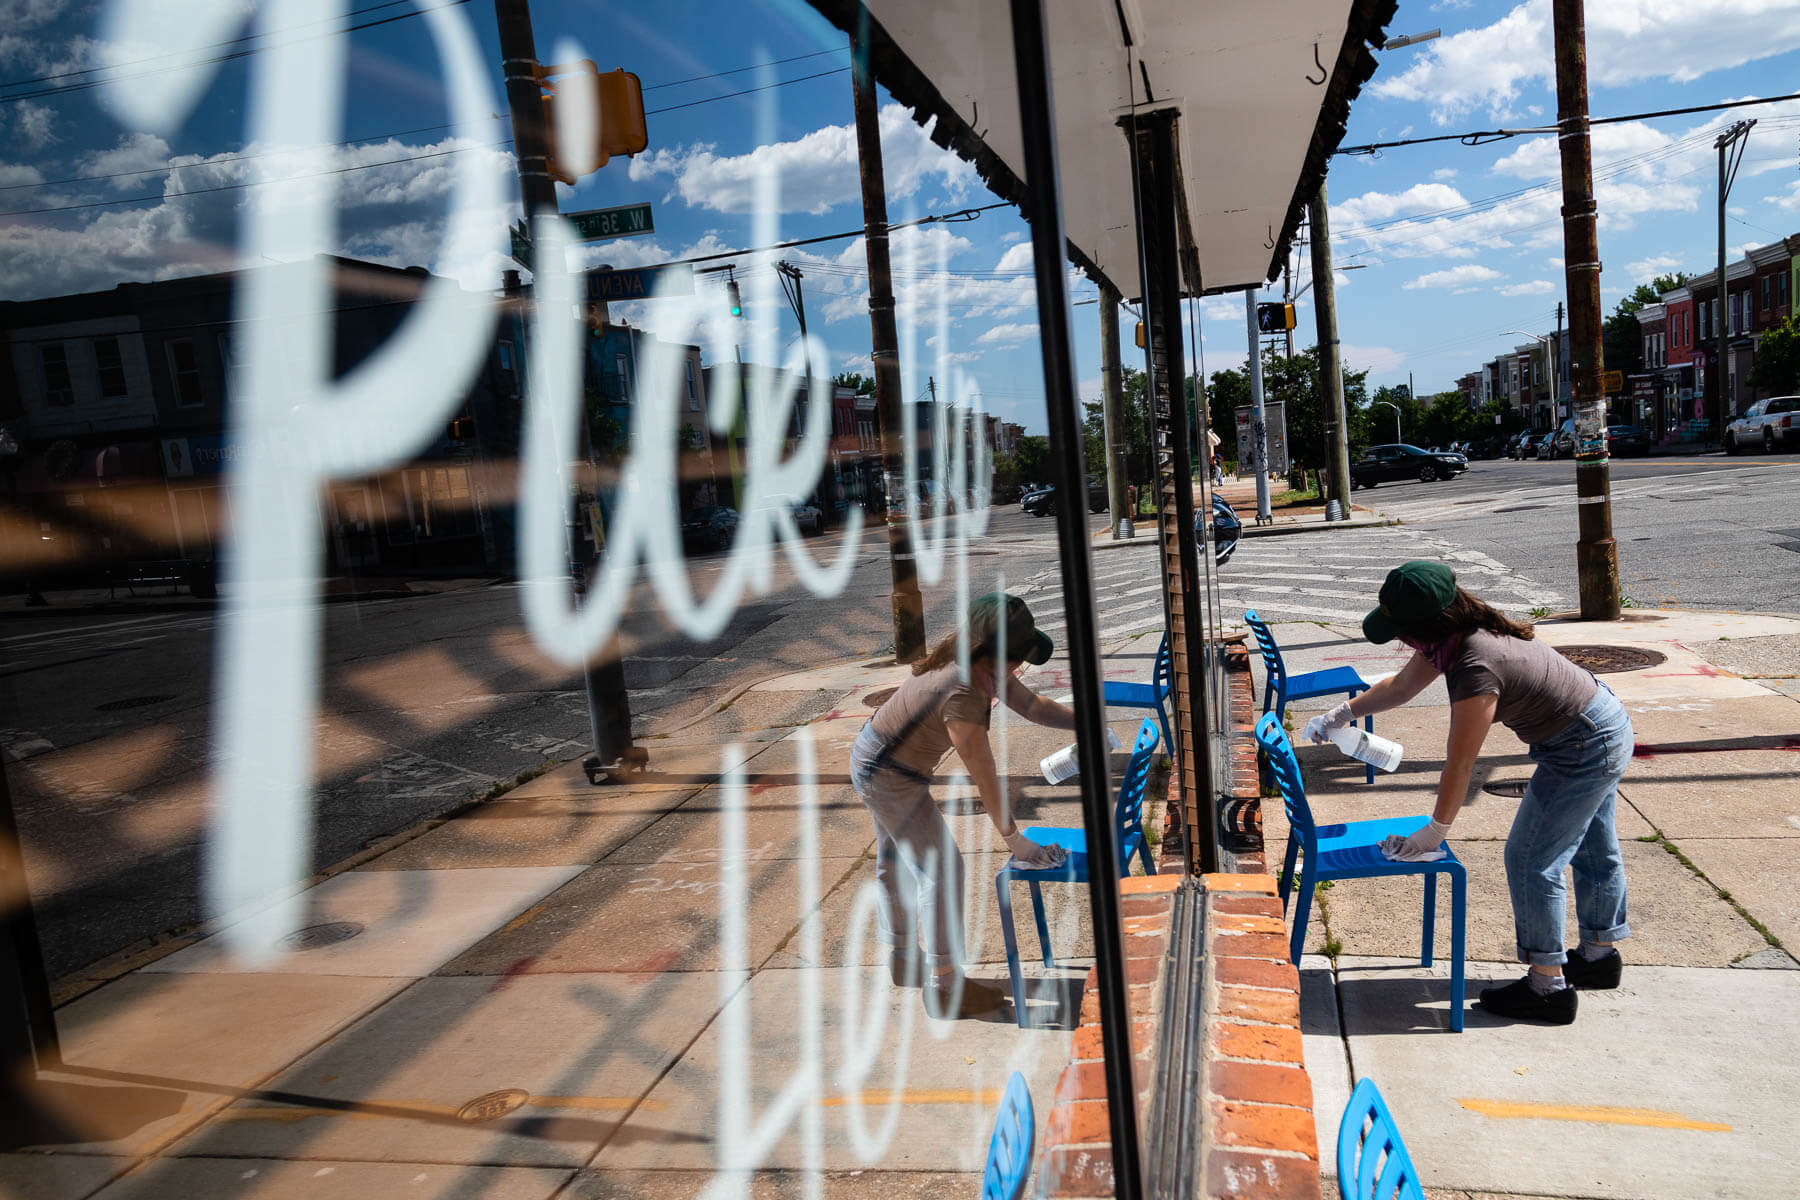 A person wipes down a chair in front of an empty restaurant window